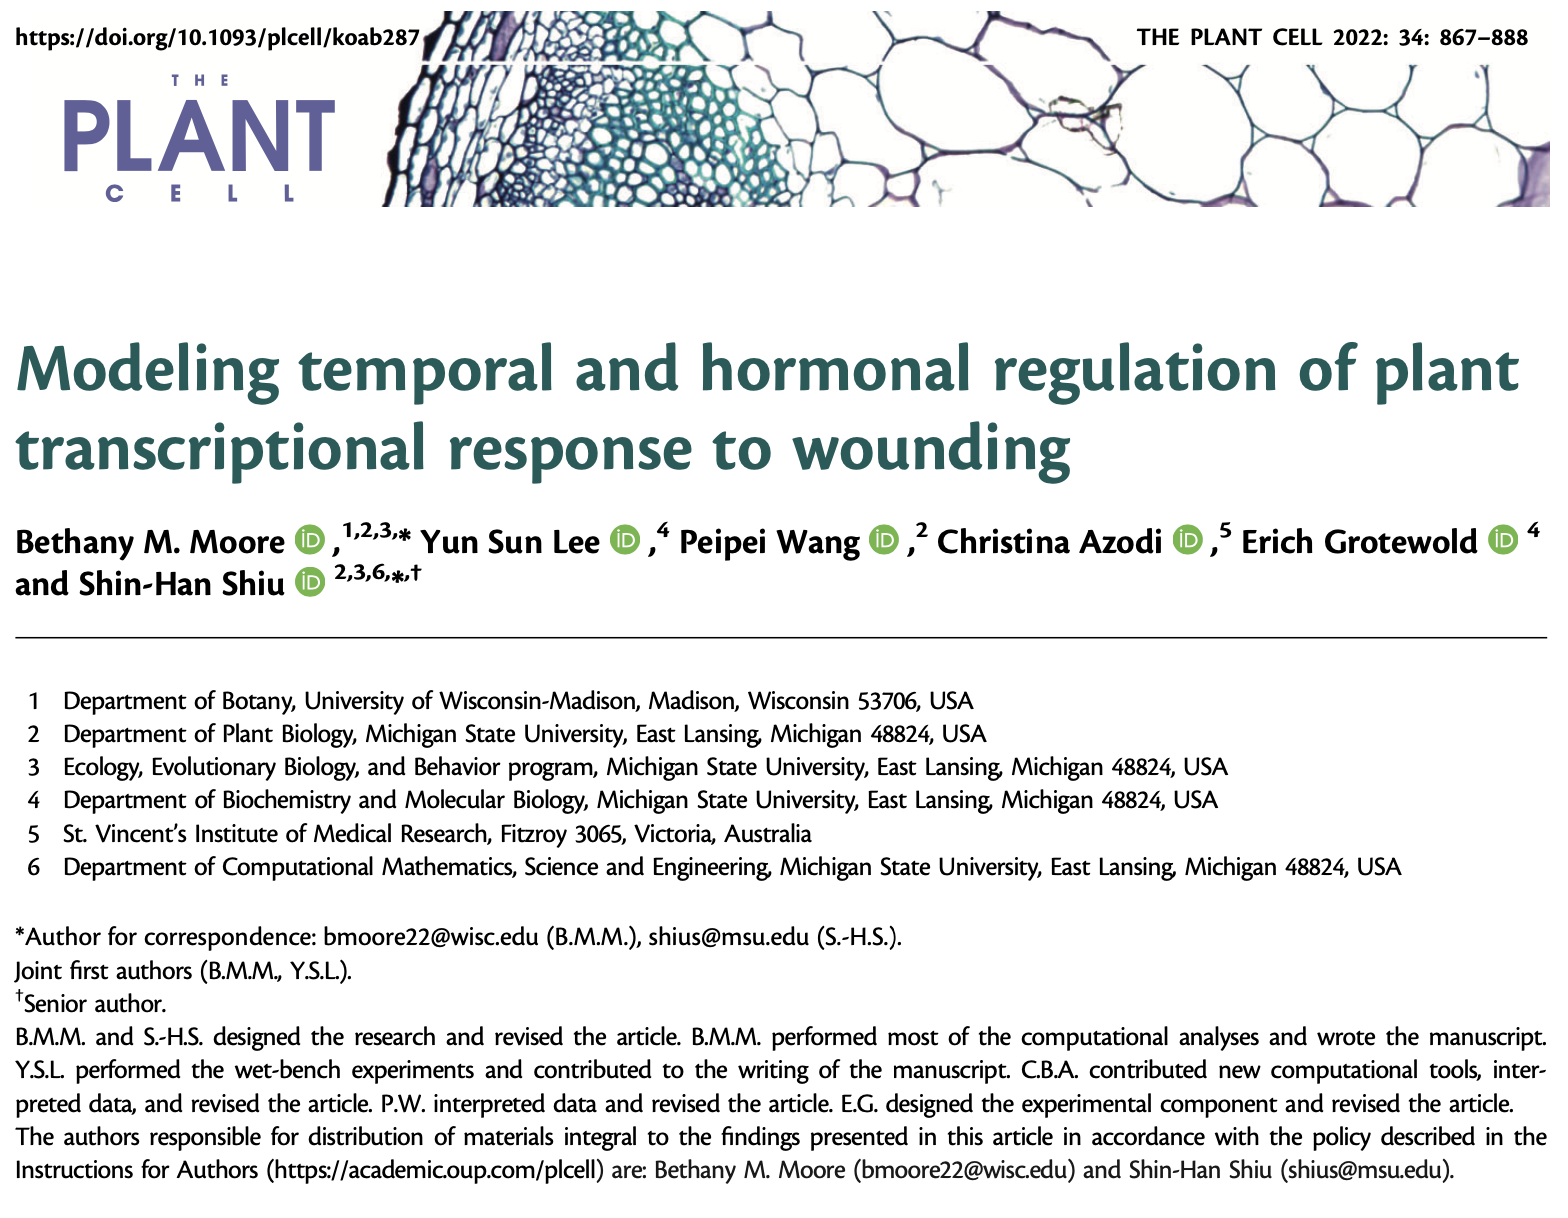 Modeling temporal and hormonal regulation of plant transcriptional response to wounding